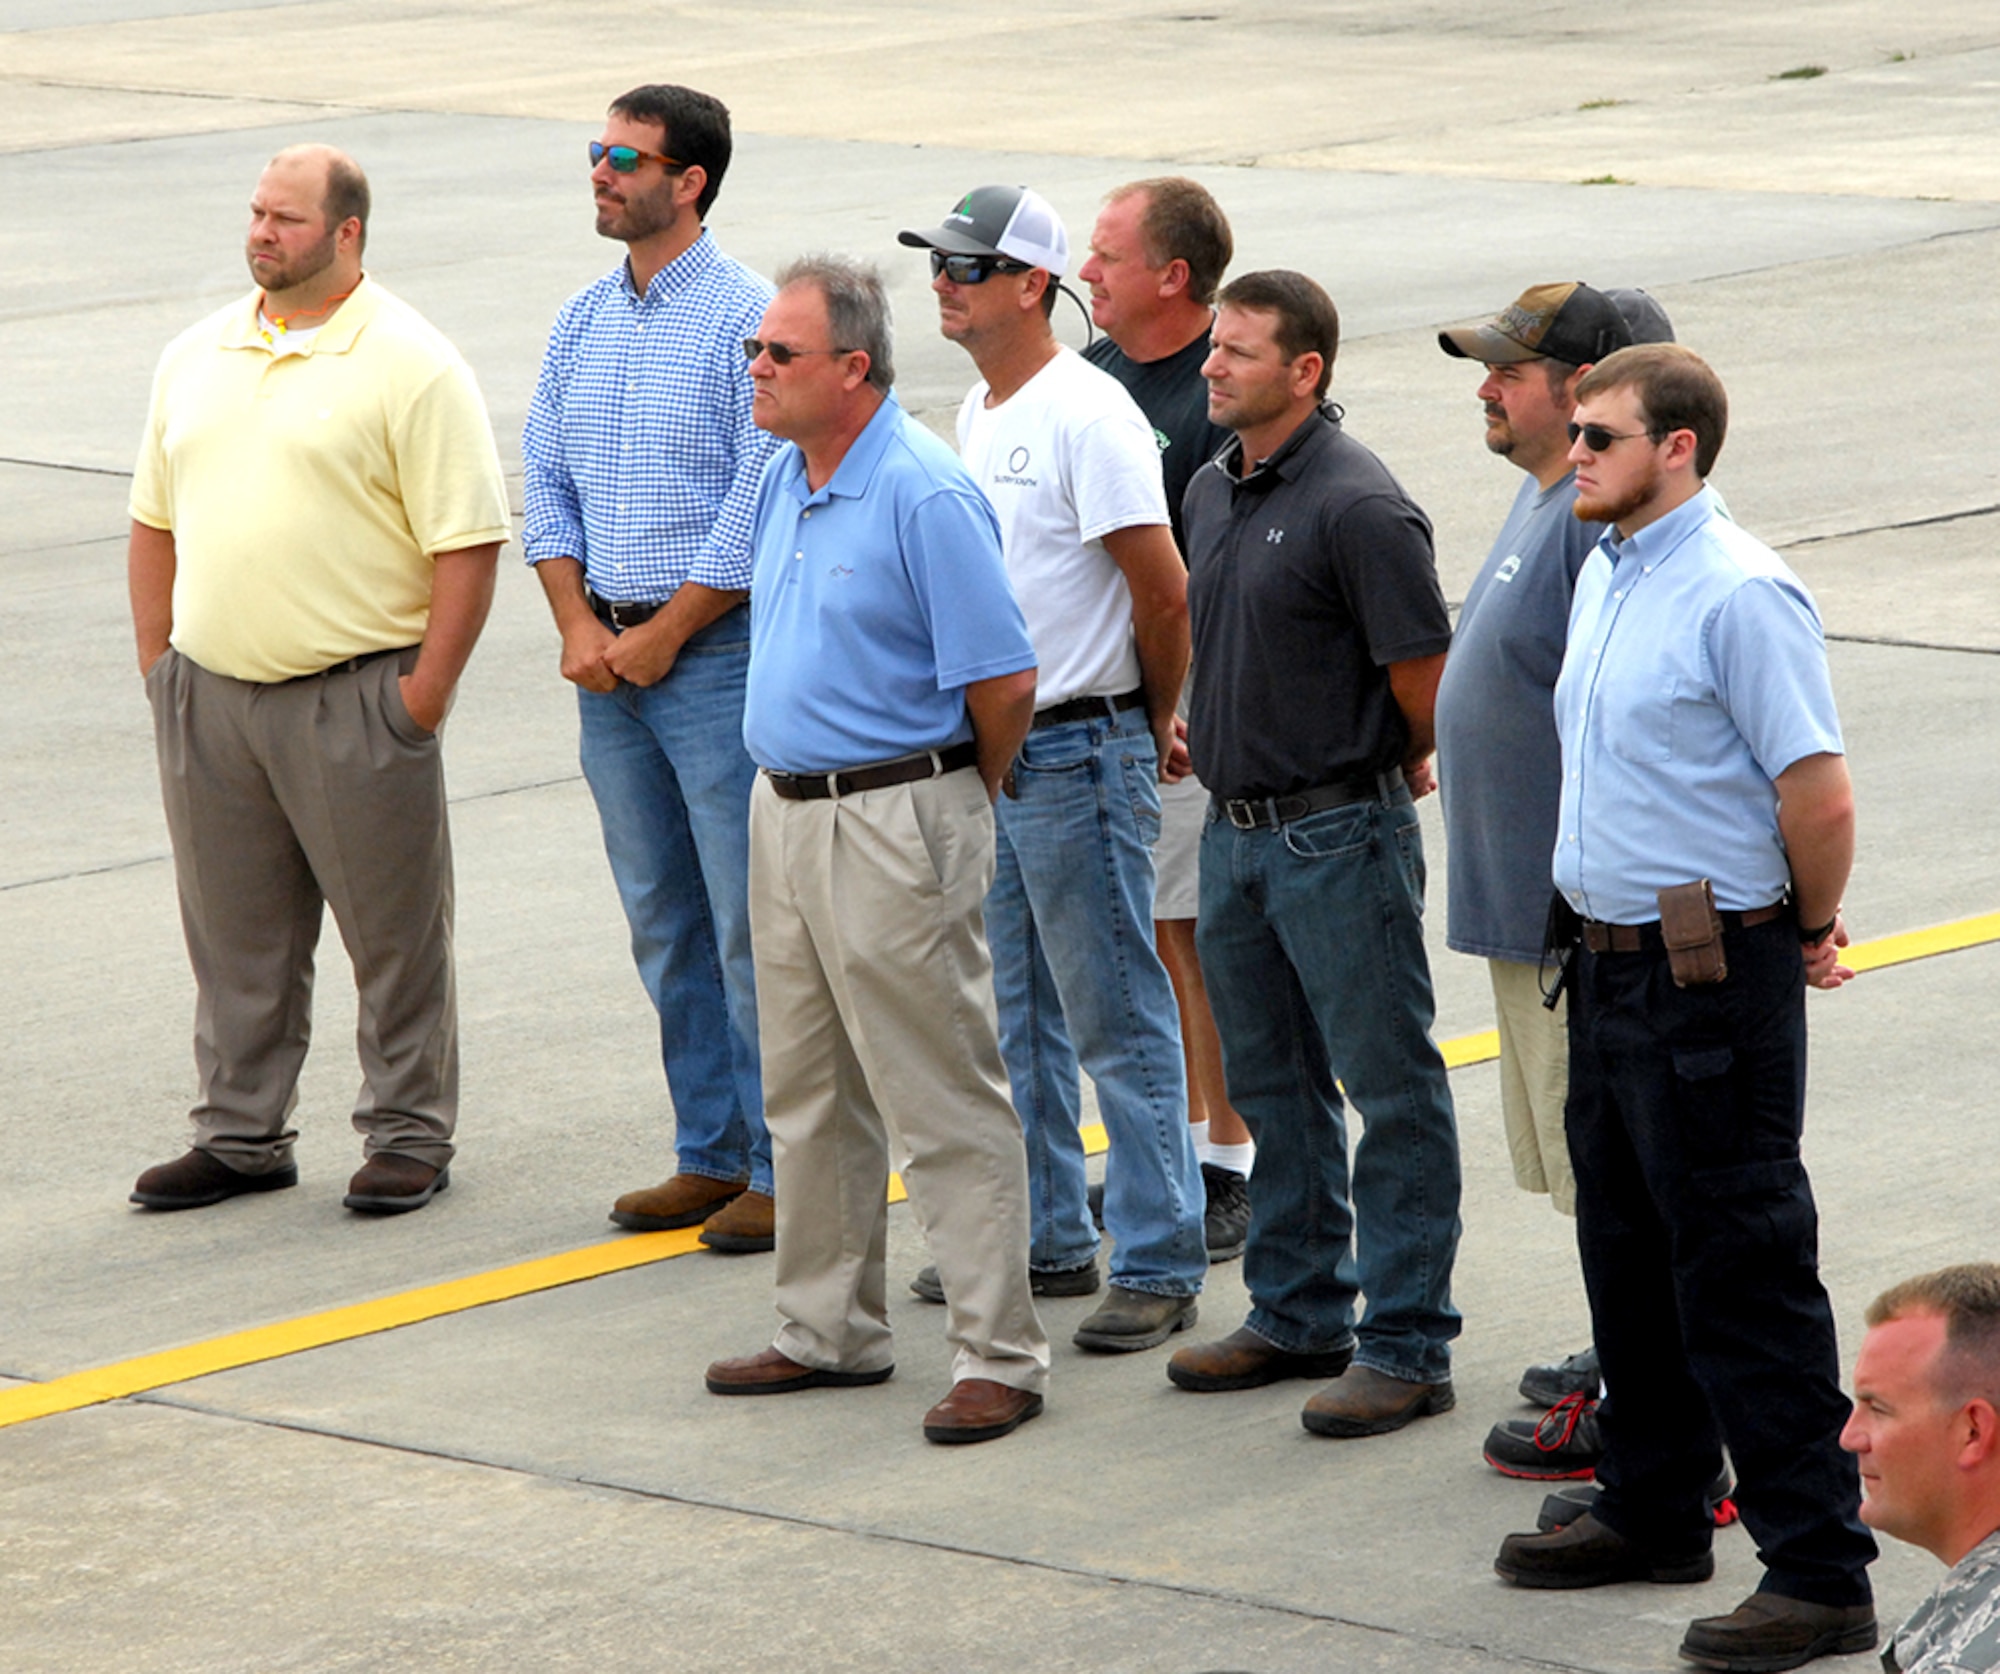 A group of Team Robins employees attend a June 29 ceremony marking the end of work done to an RQ-4 Global Hawk at the Warner Robins Air Logistics Complex. Robins Air Force Base is the first and only installation to have a building-based Launch and Recovery Element, allowing the aircraft to take off and land from this location. This is also the first time a Global Hawk has flown into an Air Force air logistics complex. Warner Robins Air Logistics Complex maintenance professionals meticulously painted the aircraft to prevent corrosion. While a programmed depot maintenance requirement for Global Hawk has not been established, the Air Force recognizes that having an organic maintenance capability for Global Hawk enhances our ability to manage the fleet and keep this resource flying. (U.S. Air Force photo/ED ASPERA